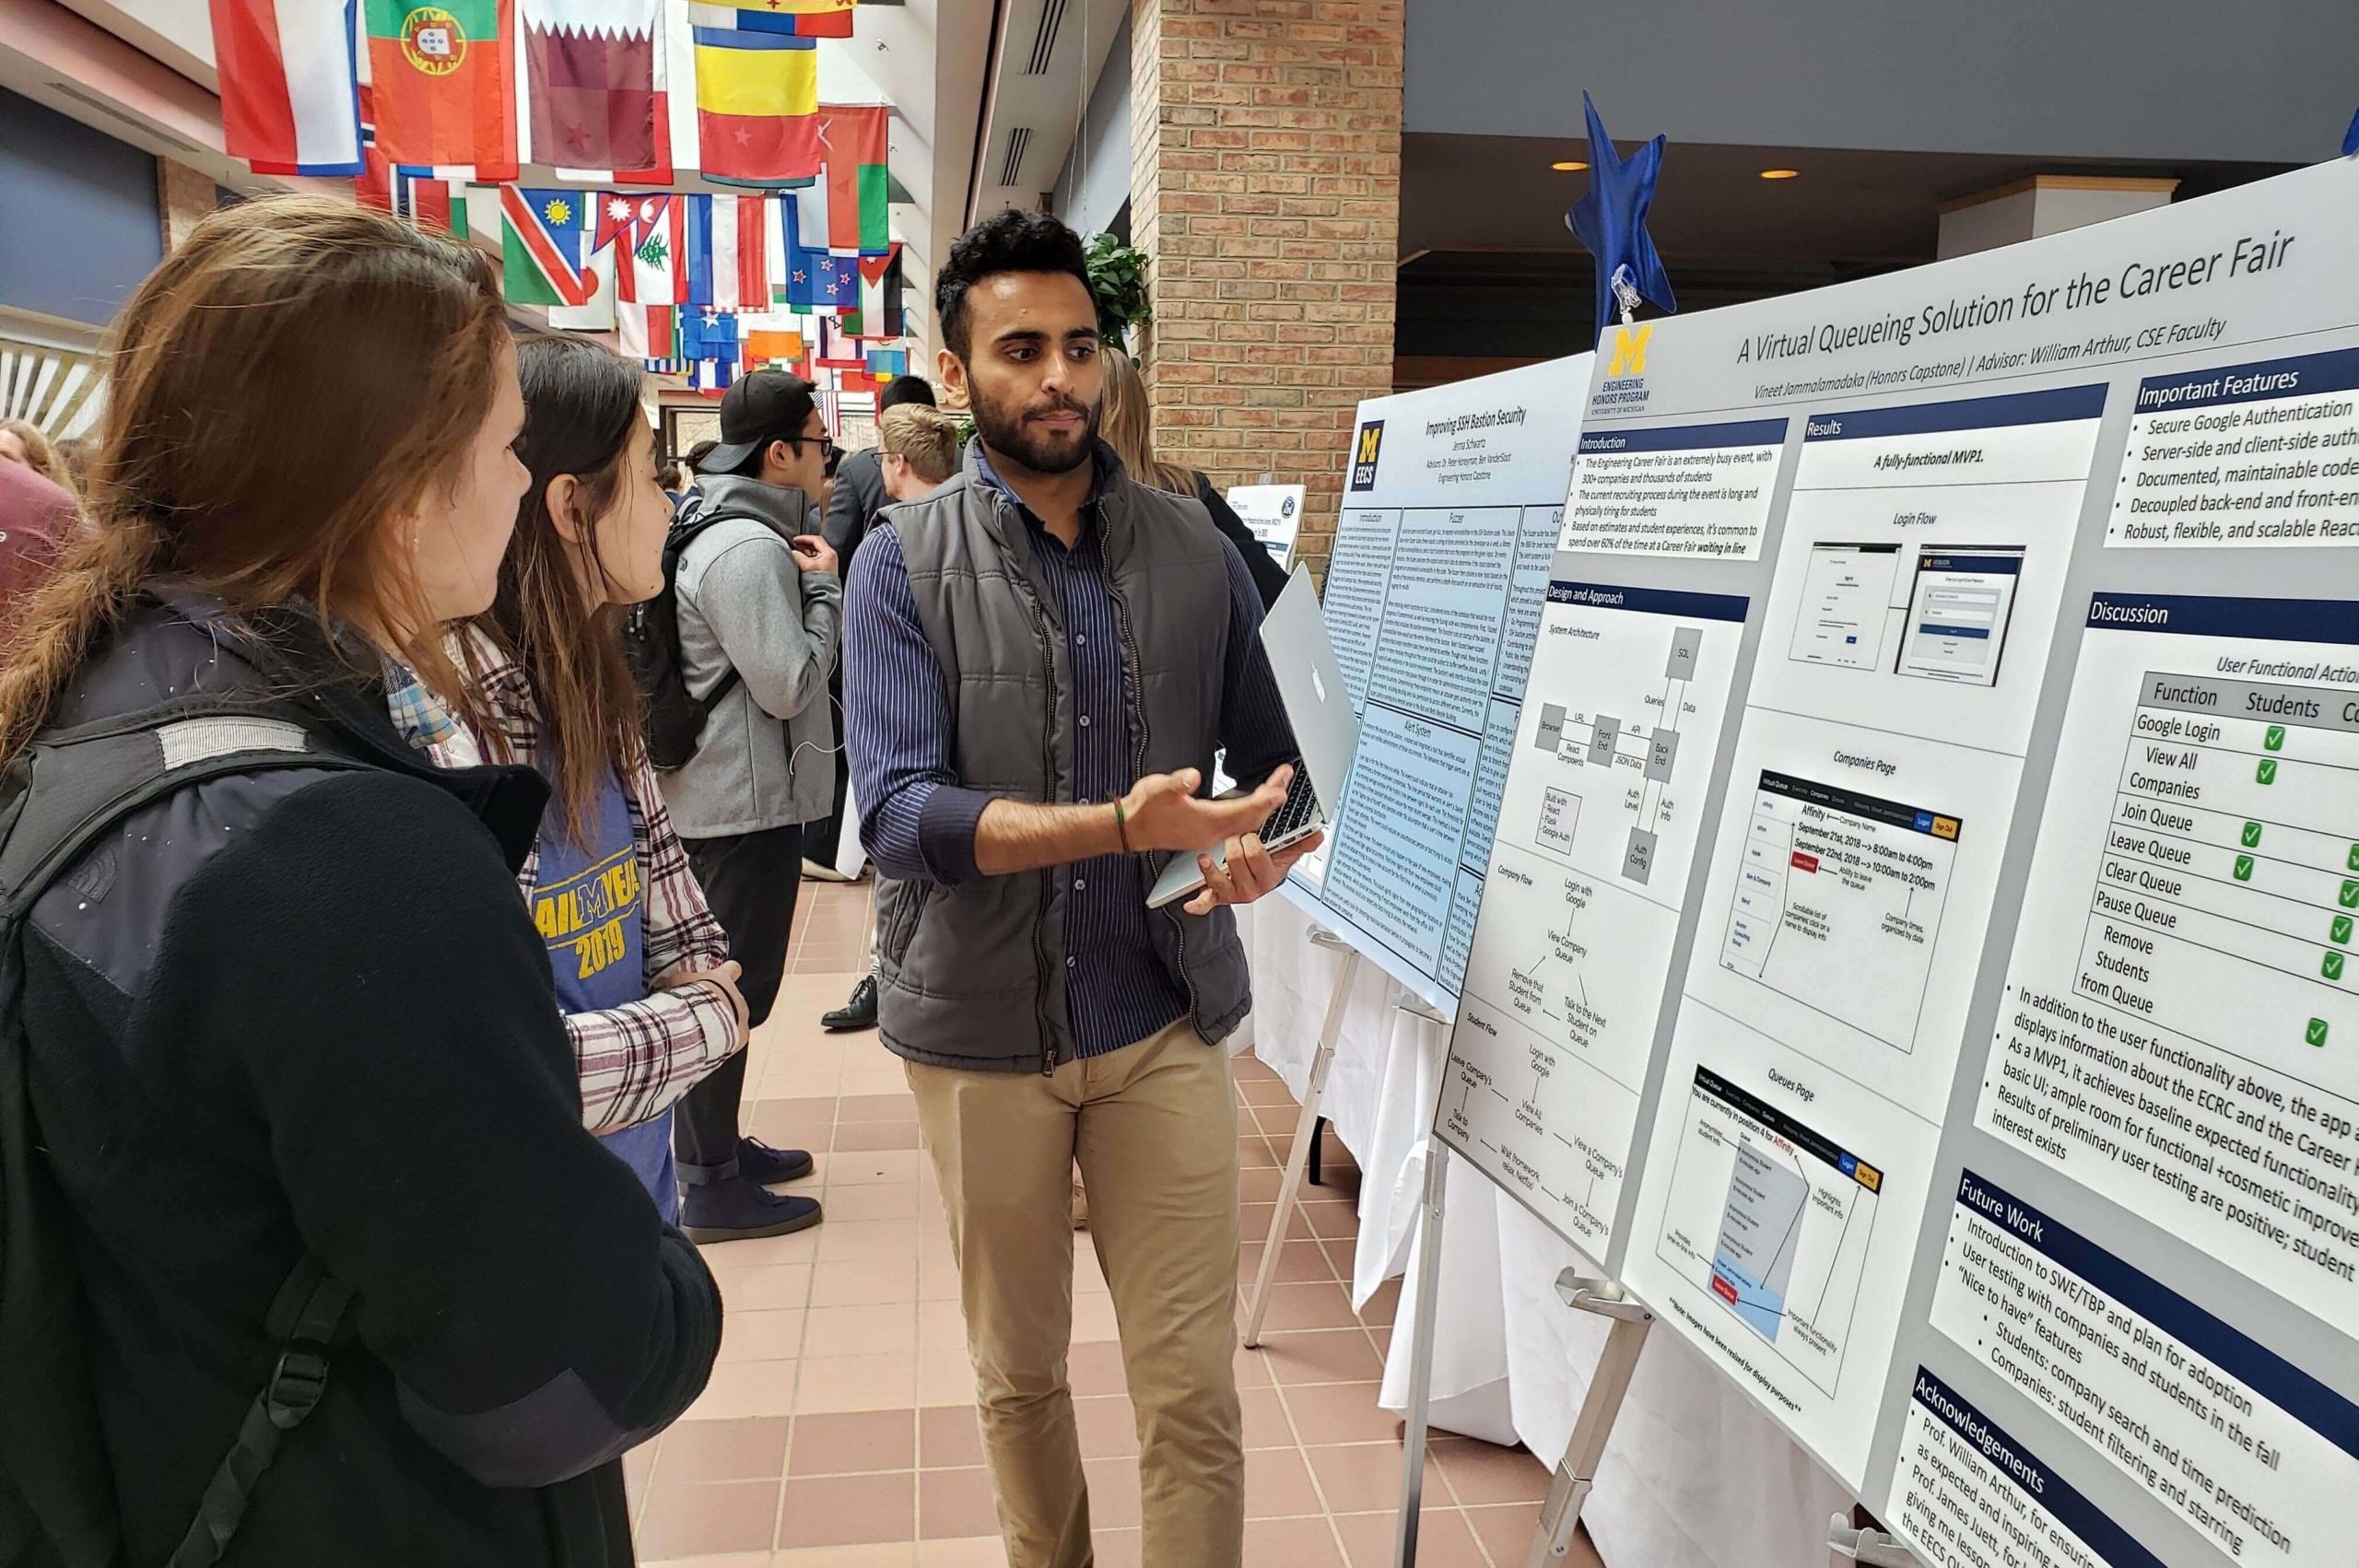 A student listening to a speech at a poster presentation in Pierpont Commons